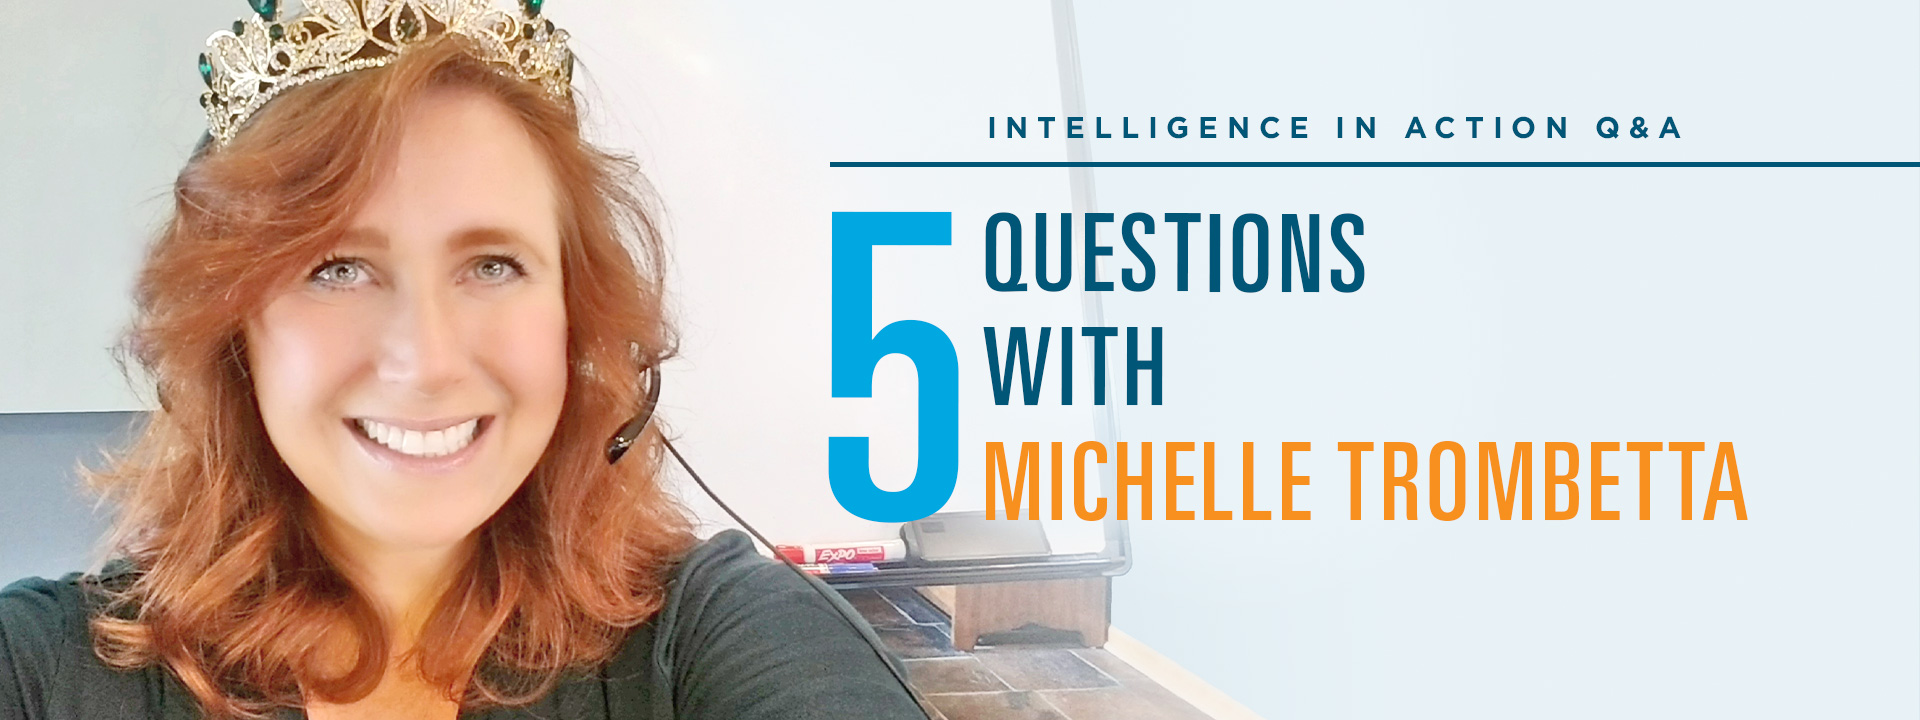 7755 fnl 5 questions with michelle trombetta feature 1920x720